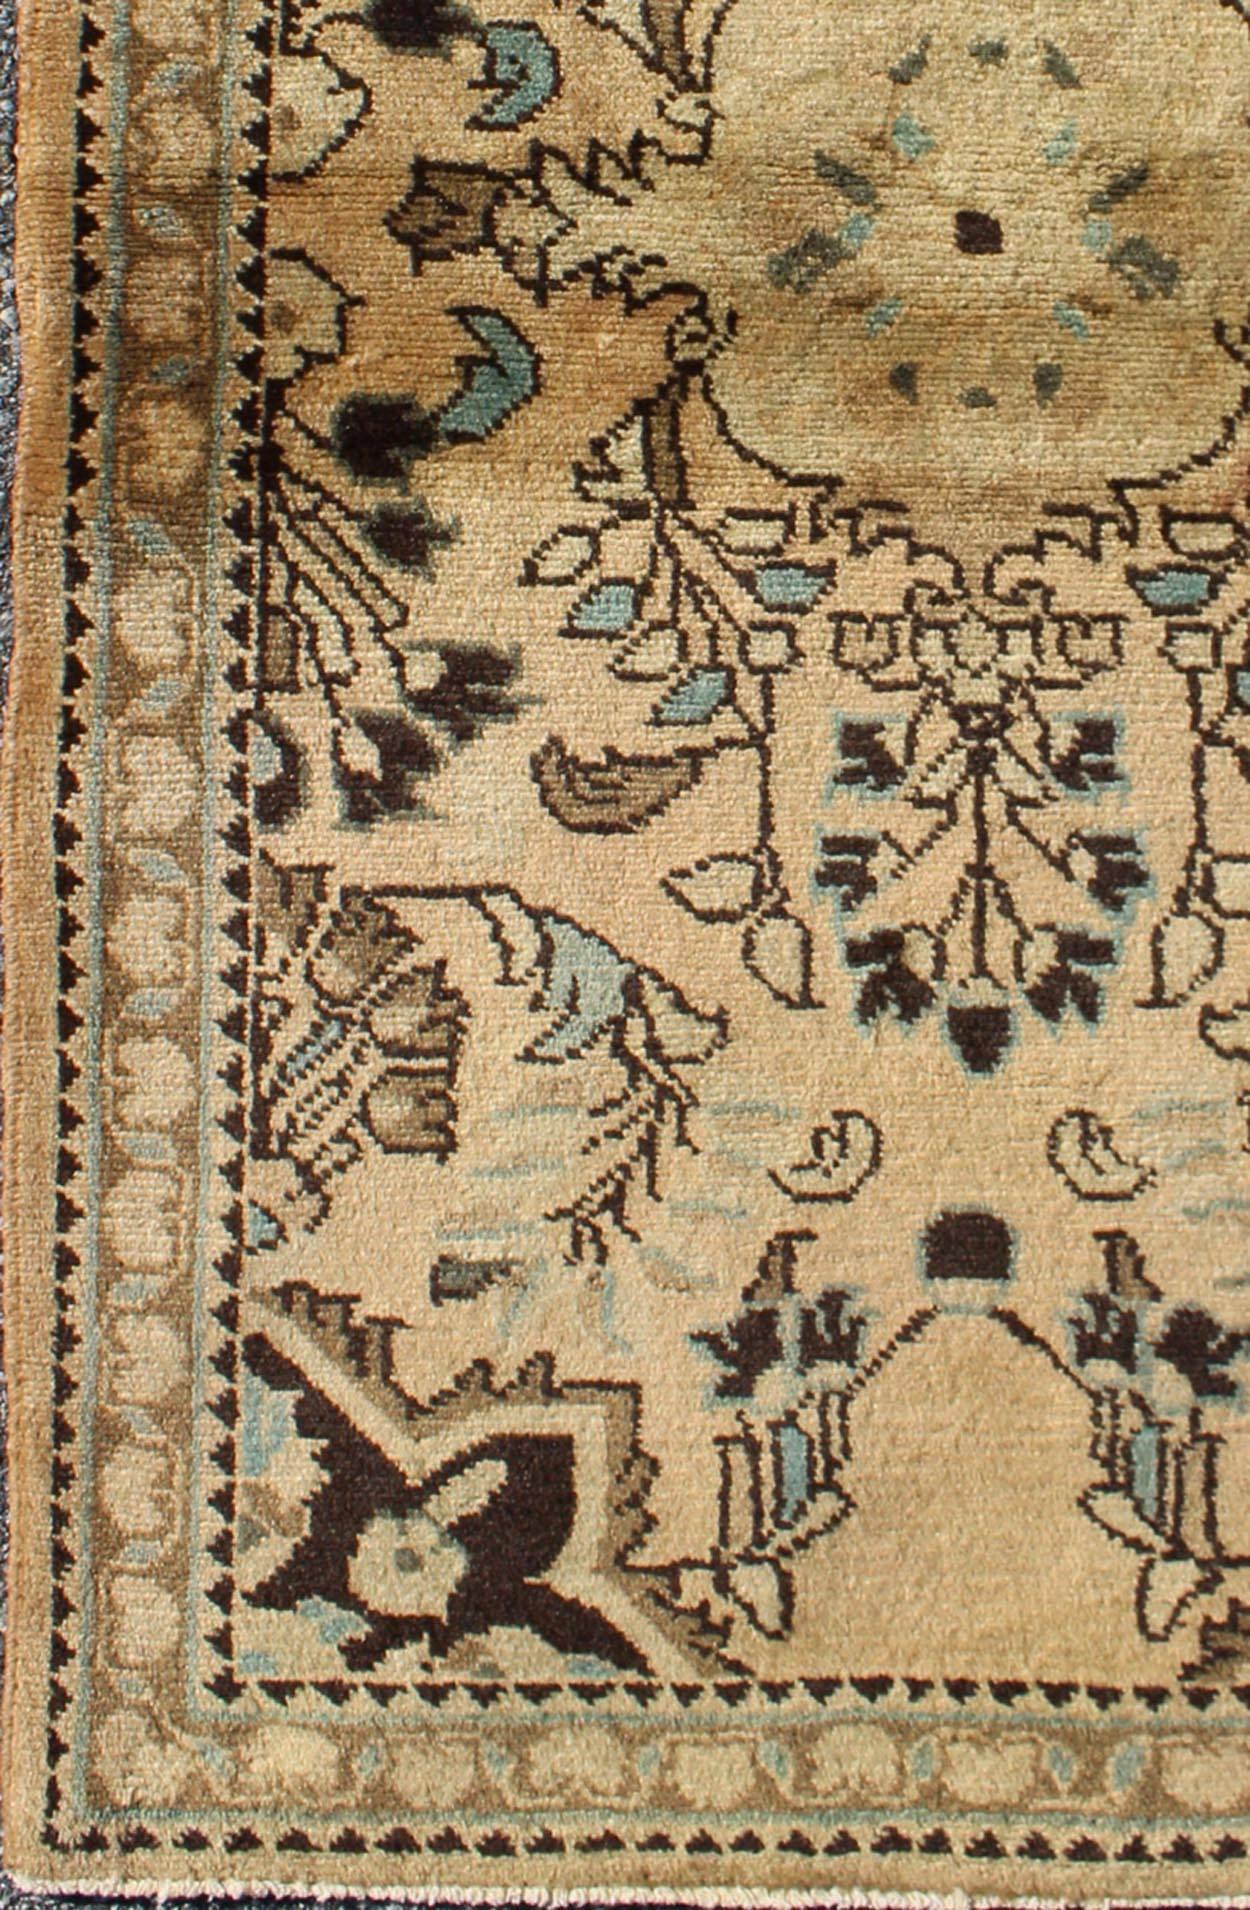 This vintage Persian Tabriz rug features a center medallion design in a neutral color palette with brown outlines. 
Measures: 2'5 x 4'3.